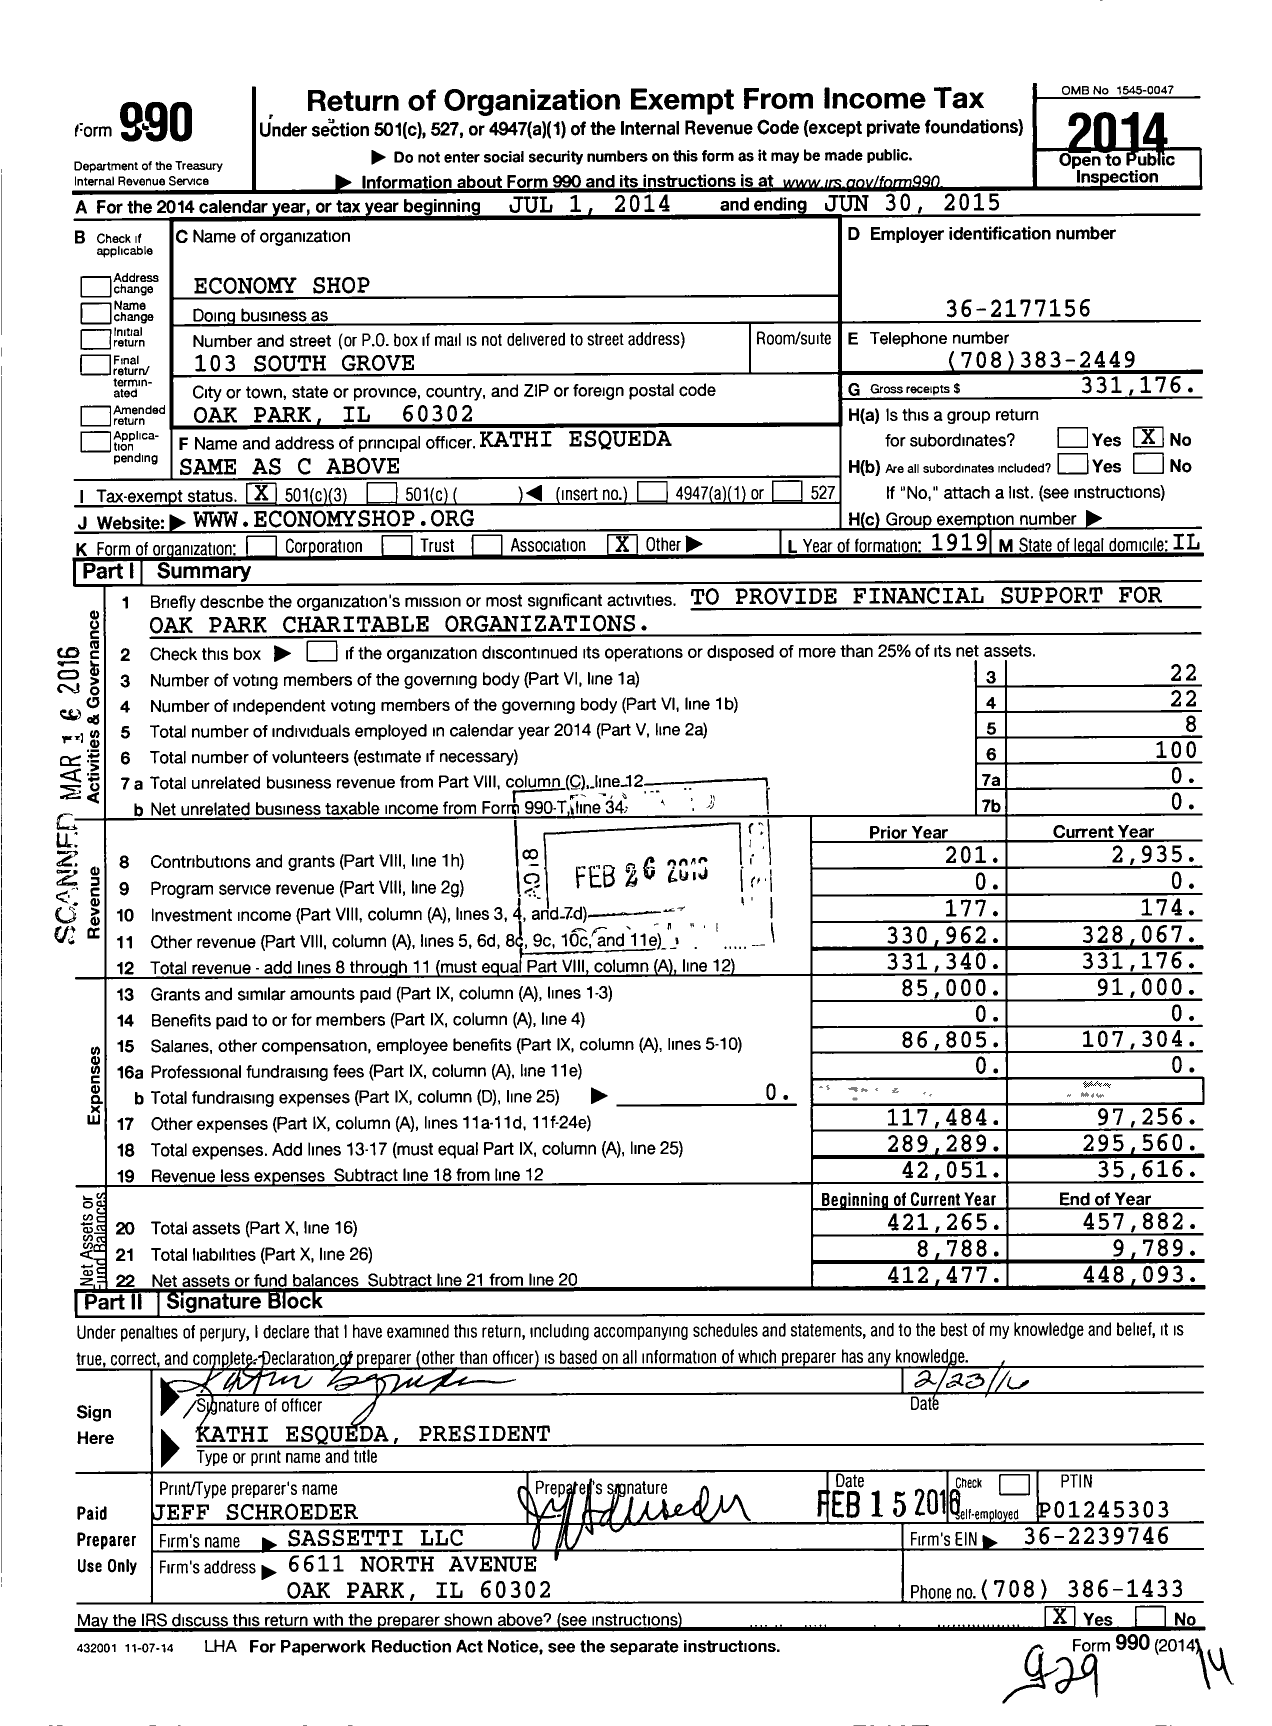 Image of first page of 2014 Form 990 for Economy Shop